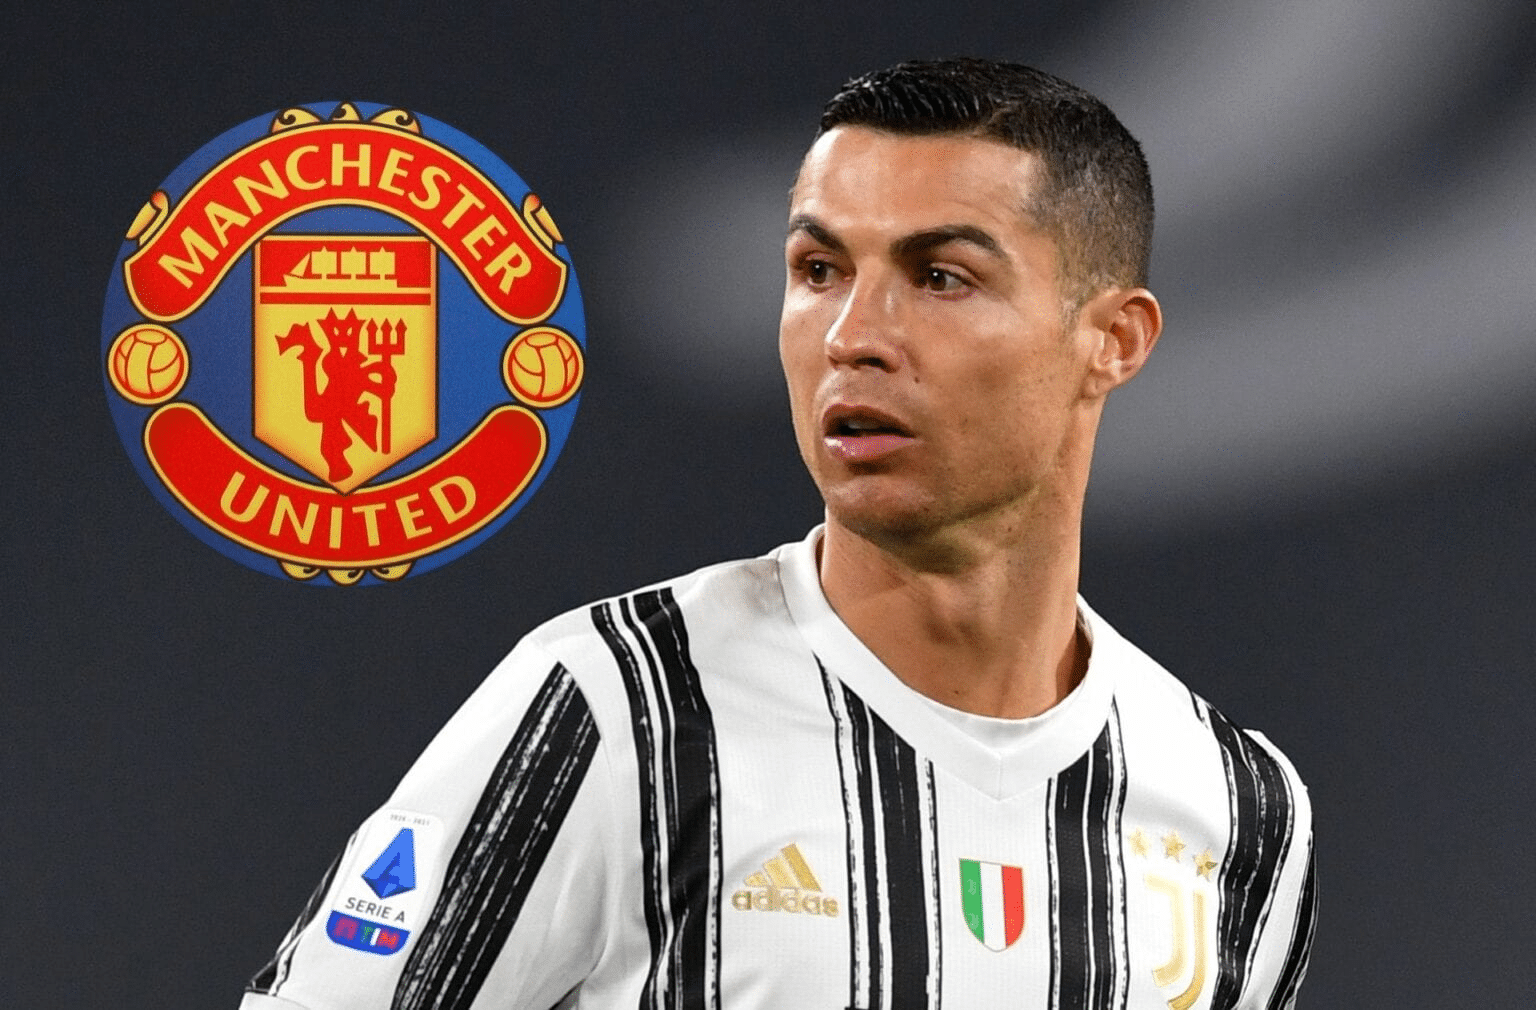 Cristiano Ronaldo More Likely To Rejoin Manchester United Than Real Madrid